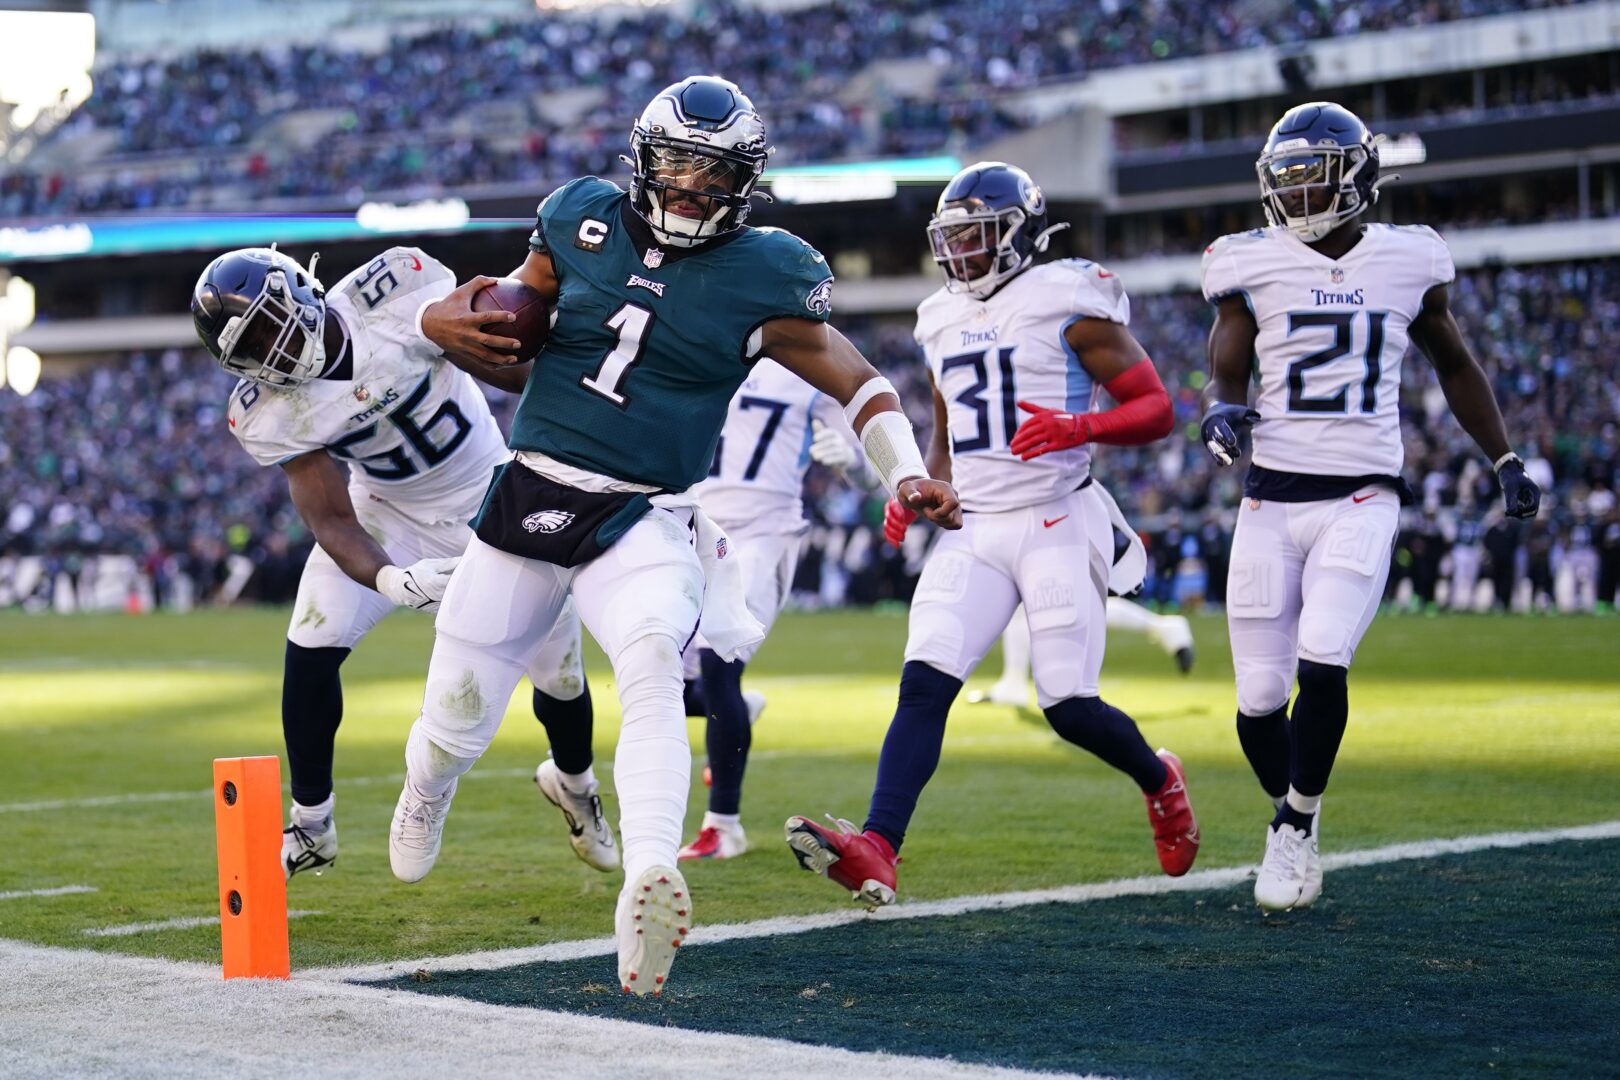 When was the last time Eagles played in NFC Championship Game